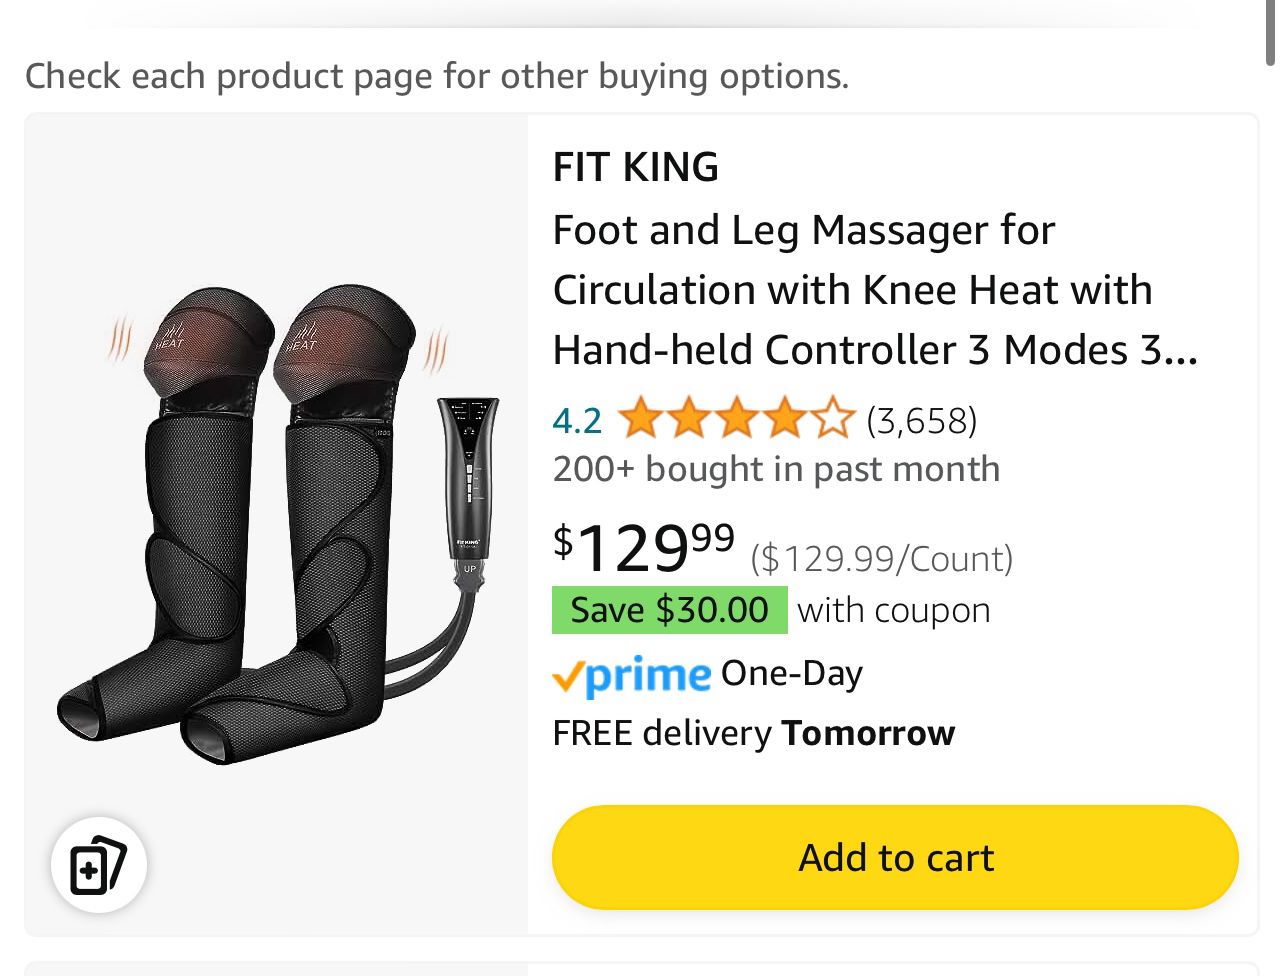 FIT KING Foot and Leg Massager for Circulation with Knee Heat with Hand-held Controller 3 Modes 3 Intensities